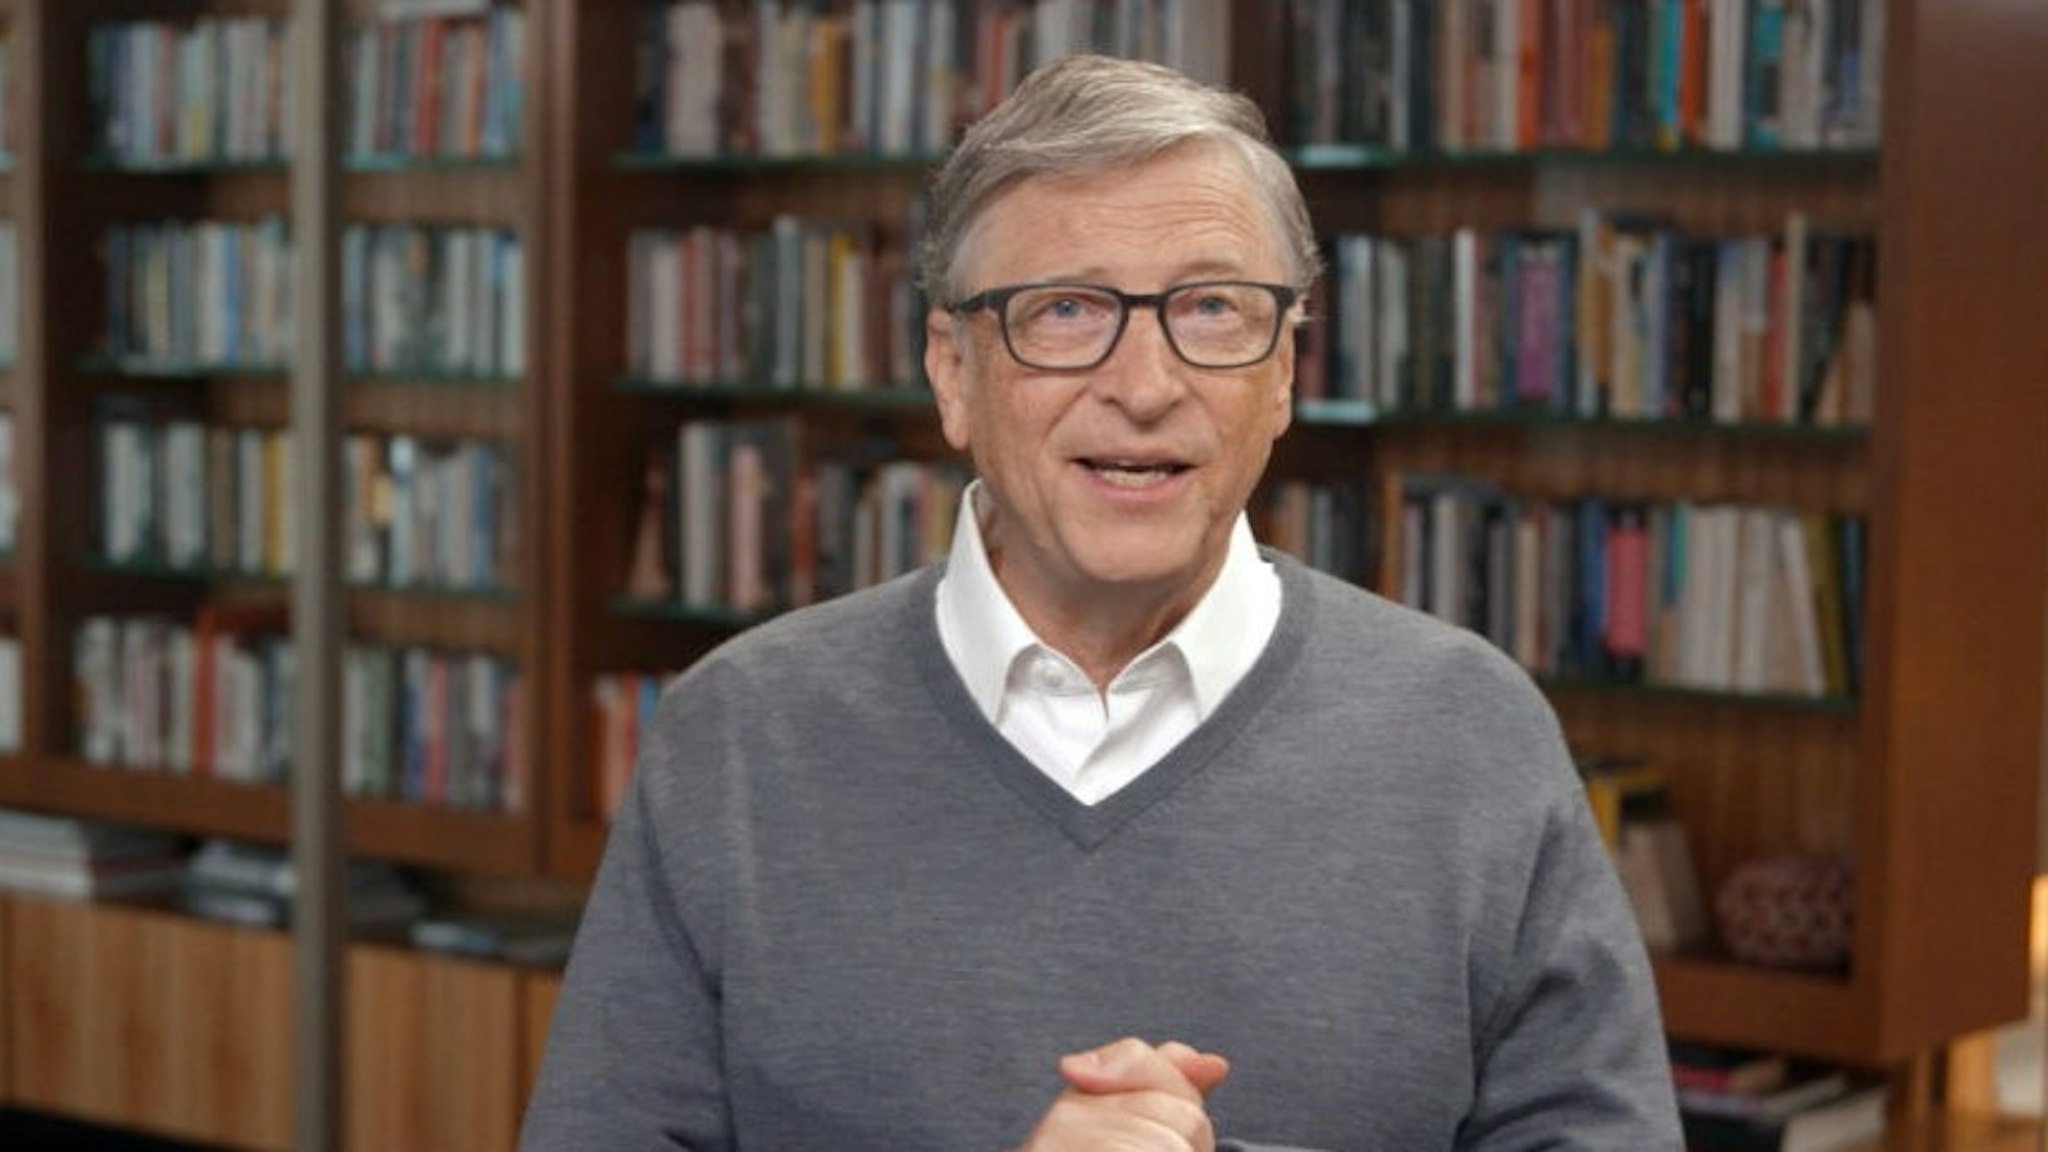 In this screengrab, Bill Gates speaks during All In WA: A Concert For COVID-19 Relief on June 24, 2020 in Washington. (Photo by